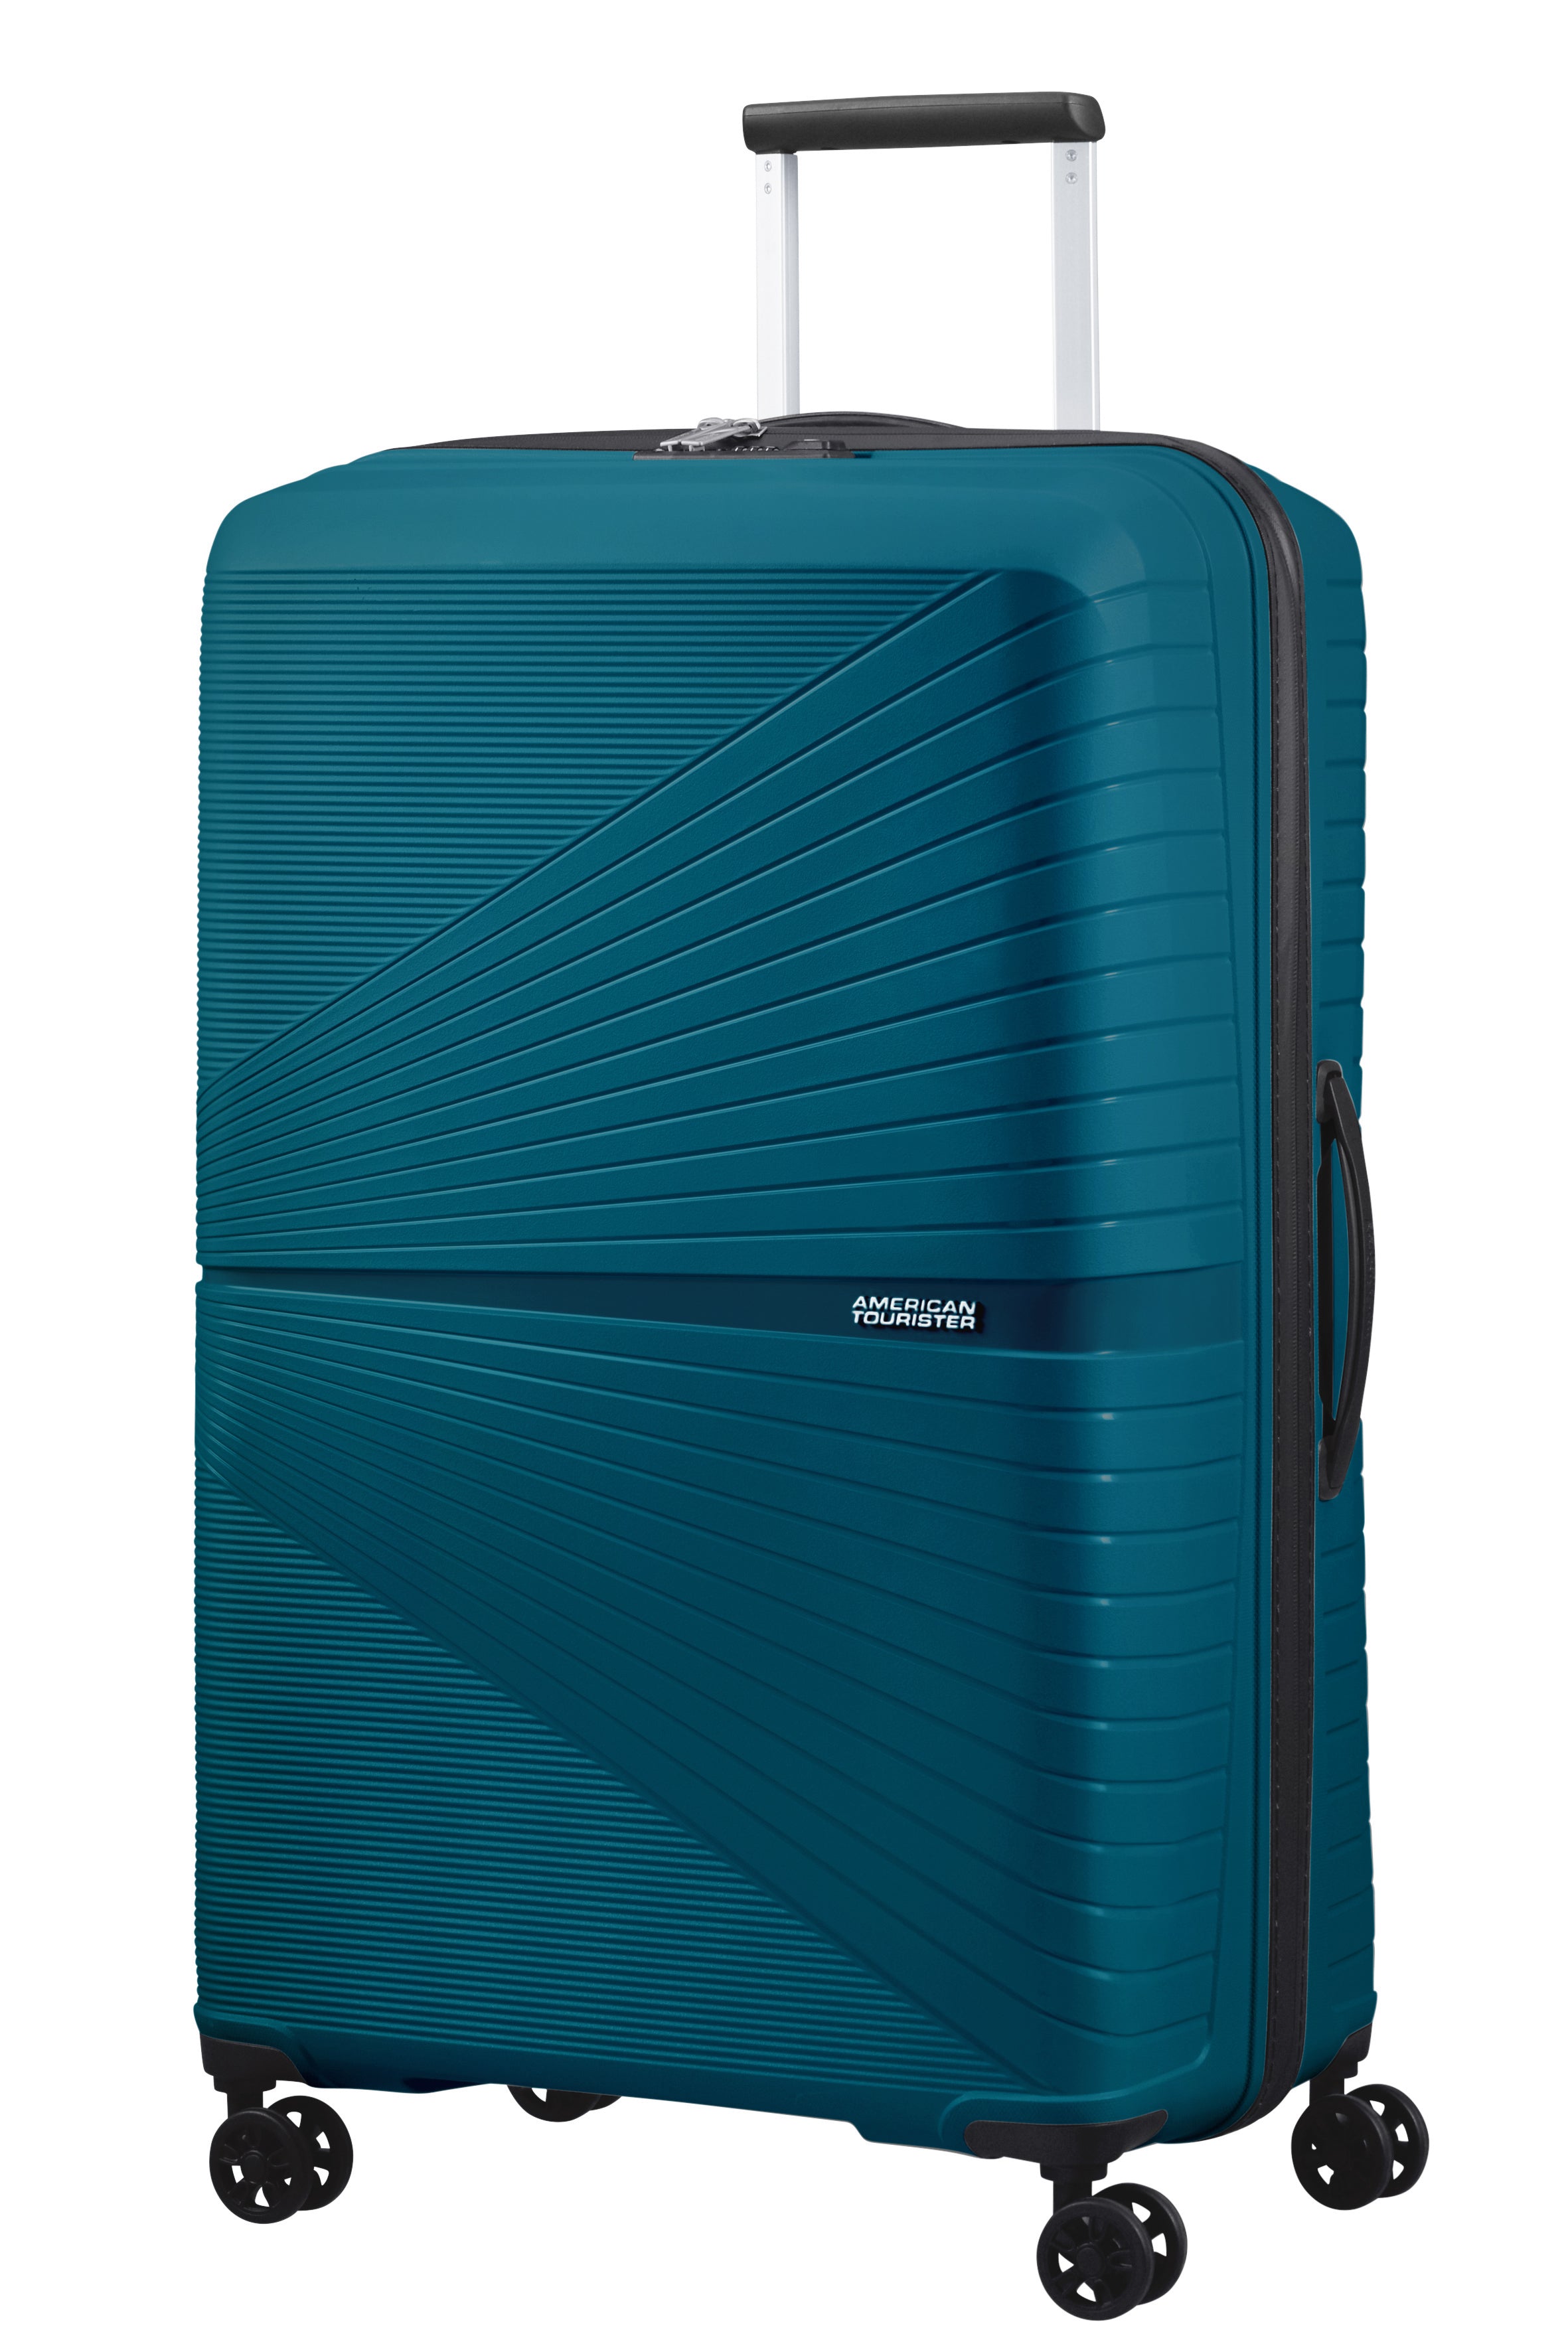 American Tourister - Airconic 77cm Large Suitcase - Deep Ocean-1